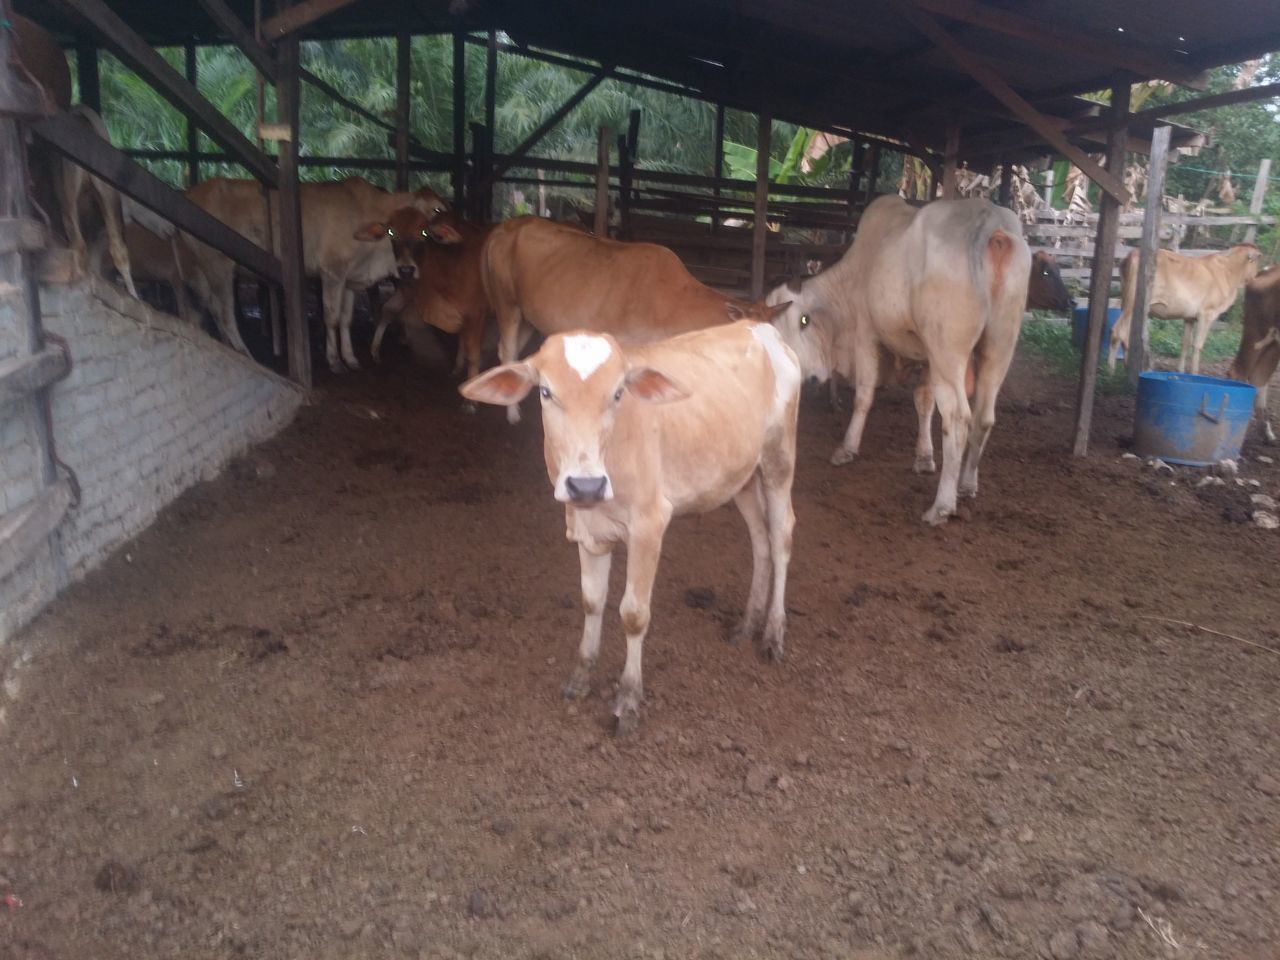 COWS IN RANCH